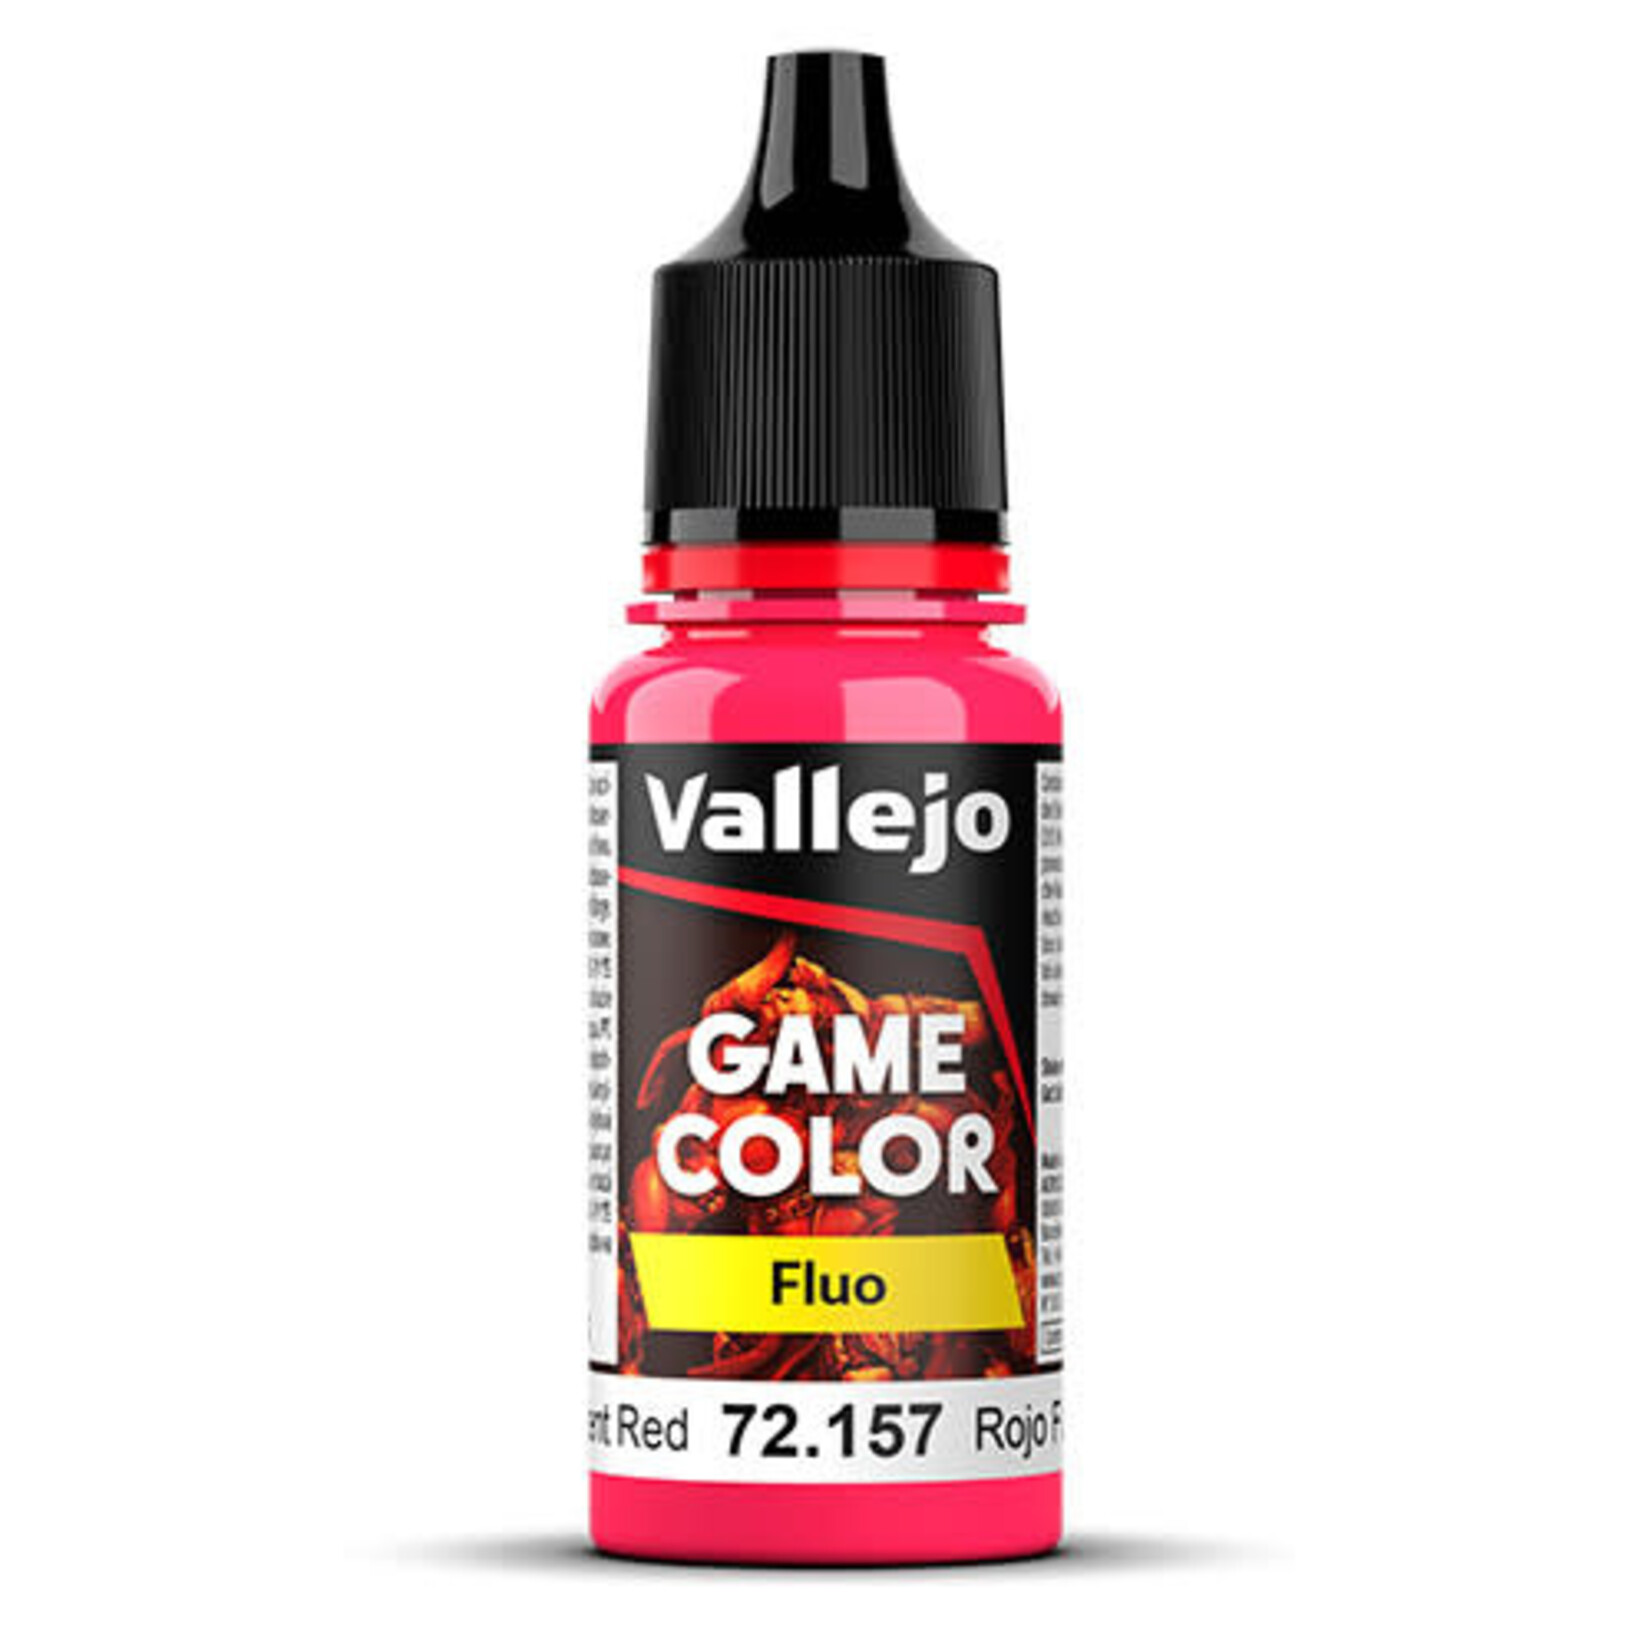 Acrylicos Vallejo VGC Fluorescent Red 18ml